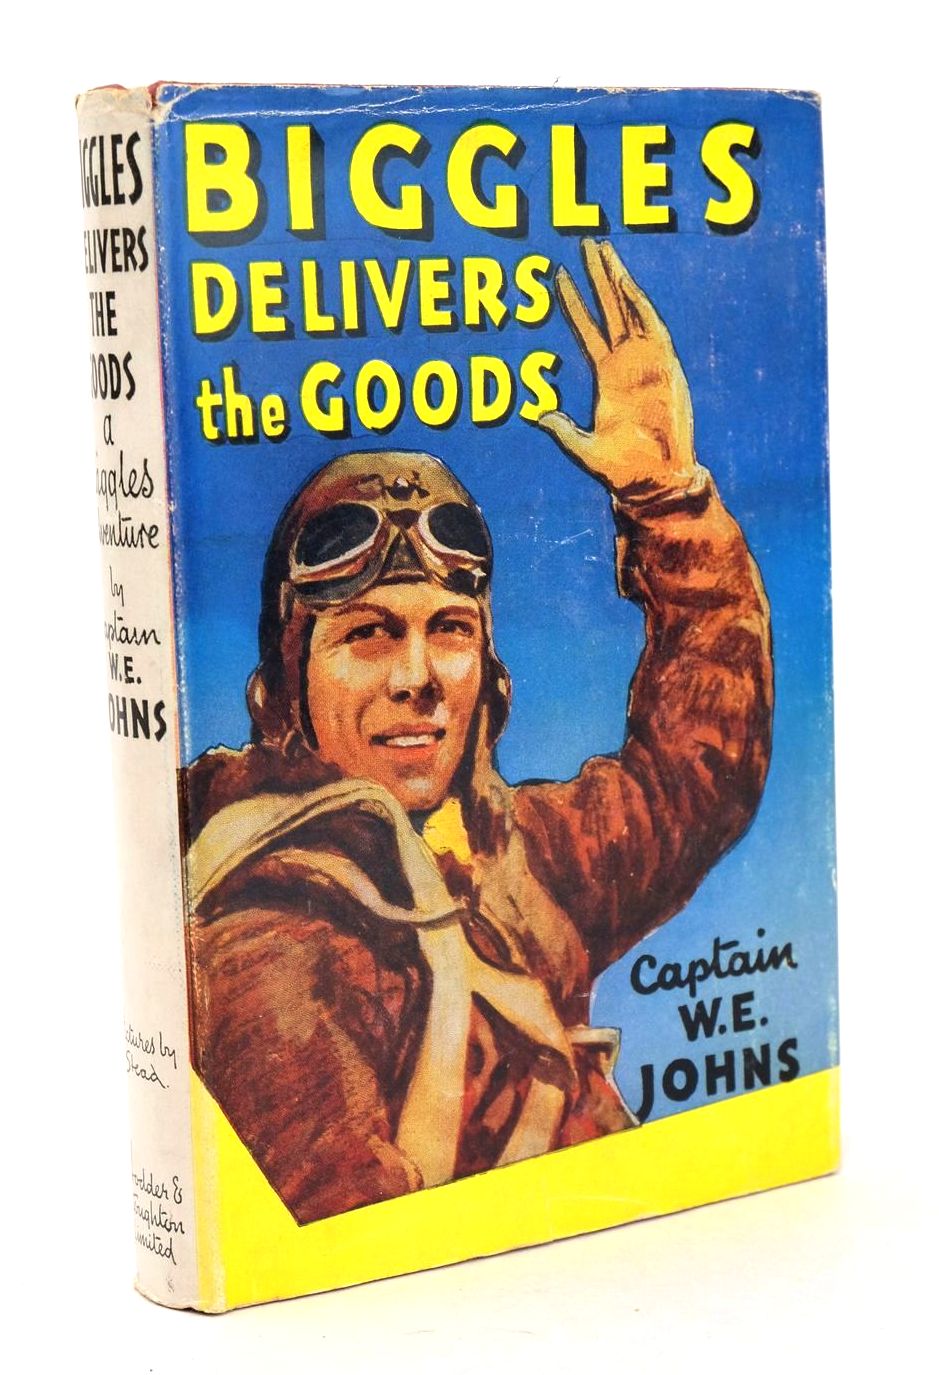 Photo of BIGGLES DELIVERS THE GOODS written by Johns, W.E. illustrated by Stead,  published by Hodder &amp; Stoughton (STOCK CODE: 1326375)  for sale by Stella & Rose's Books